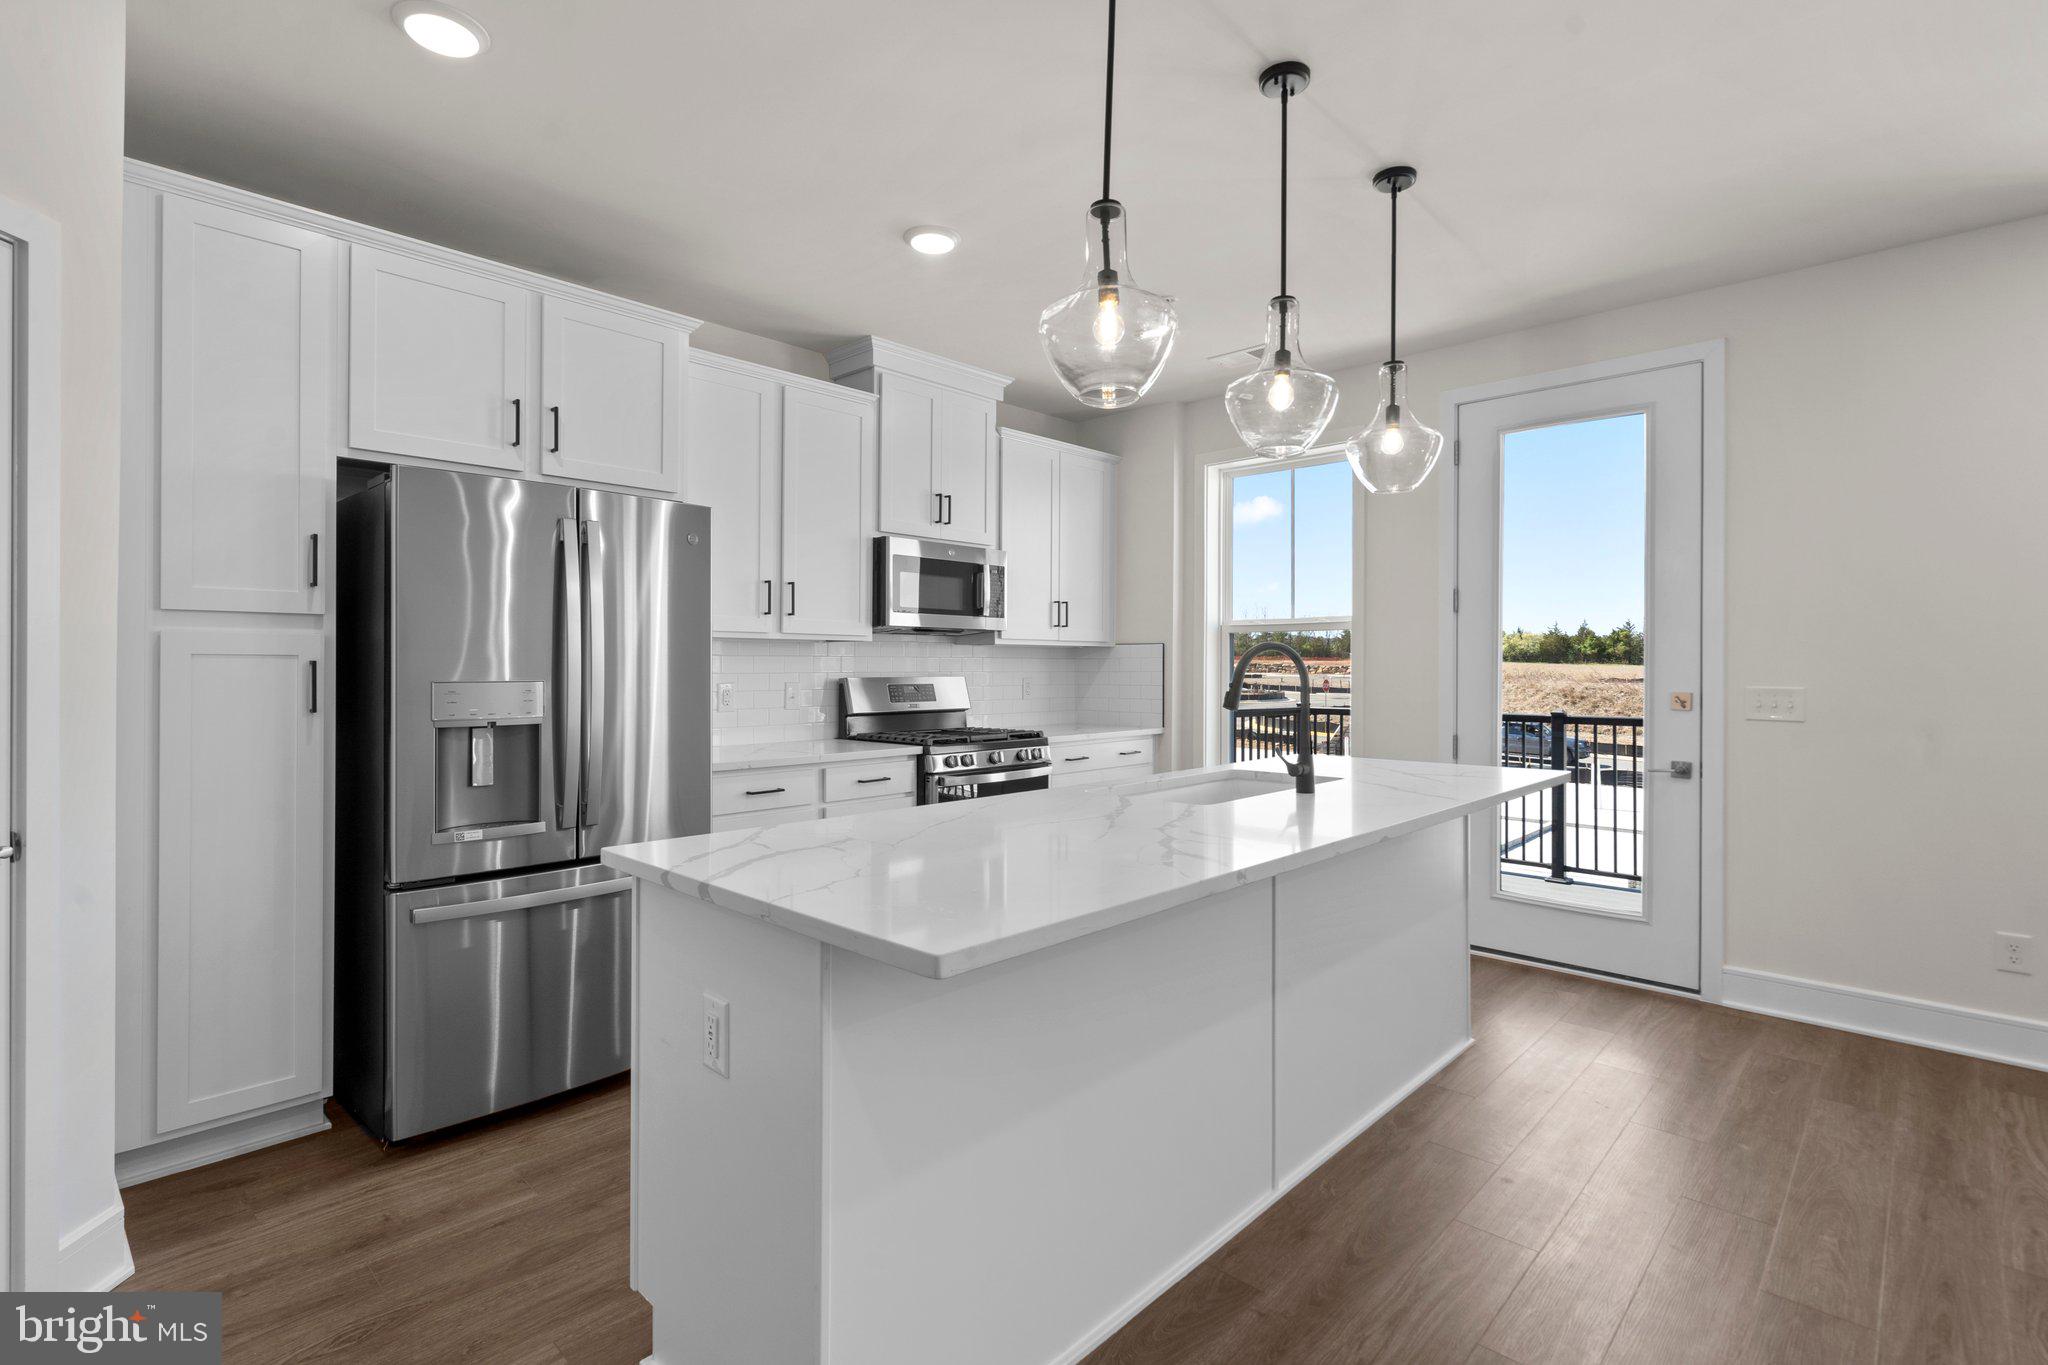 a kitchen with stainless steel appliances a refrigerator a sink cabinets wooden floor and a chandelier